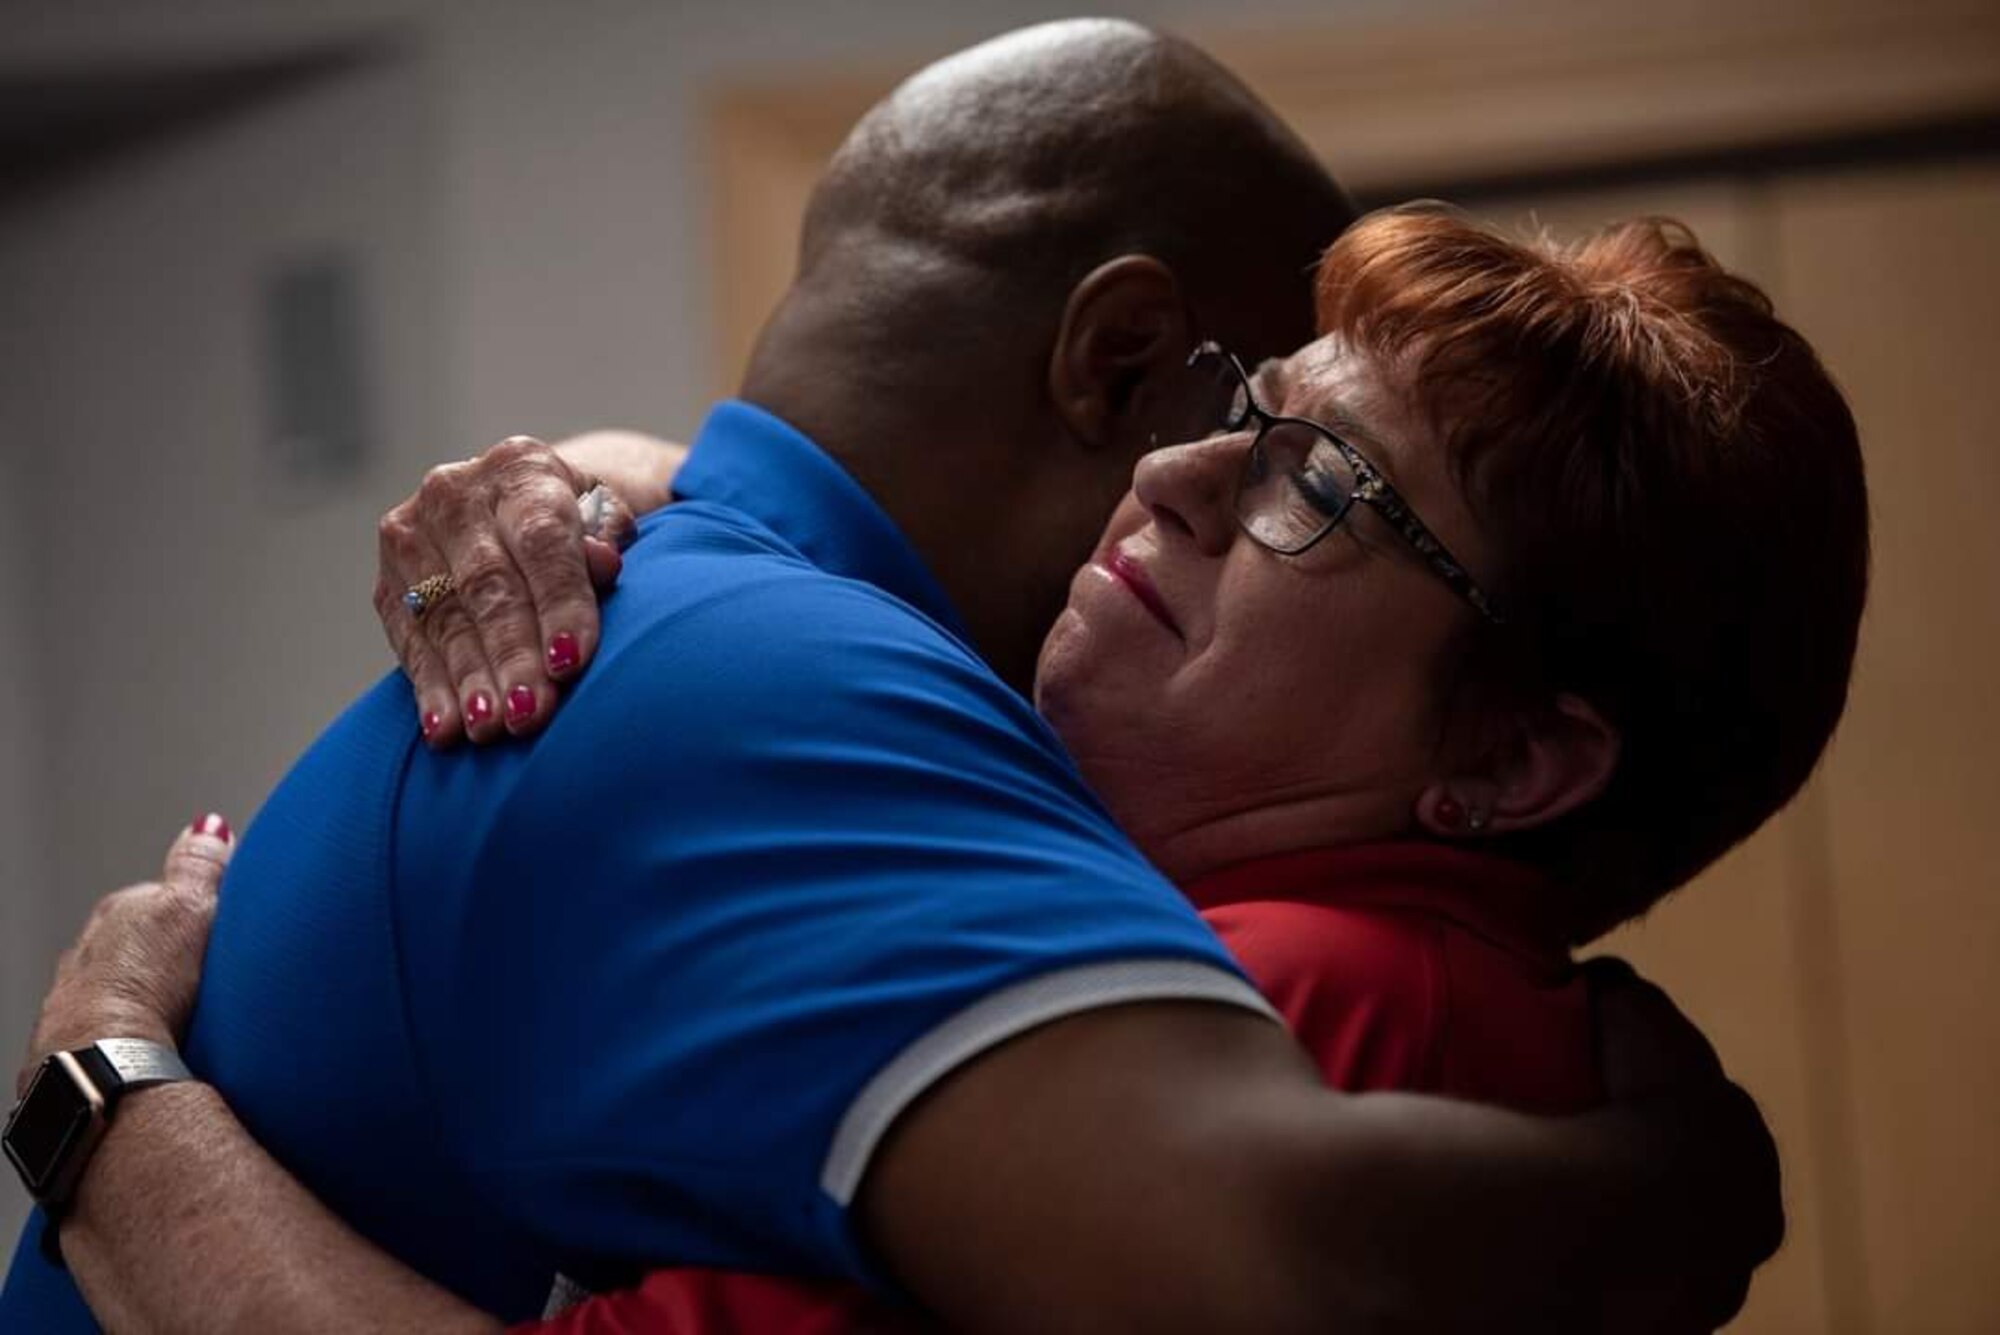 Master Sgt. (ret) Jonathan Session, hugs his Recovery Care Coordinator, Debra Morotini, at Dyess Air Force Base, Texas on June 7, 2021. Mrs. Morotini helped Jonathan get his military pay and Tricare benefits fixed once he was not authorized to retire on his original date. This issue caused a lot of stress for Jonathan and his family. He now refers to Mrs. Morotini as his “angel.” (U.S. Air Force photo by A1C Colin Hollowell)